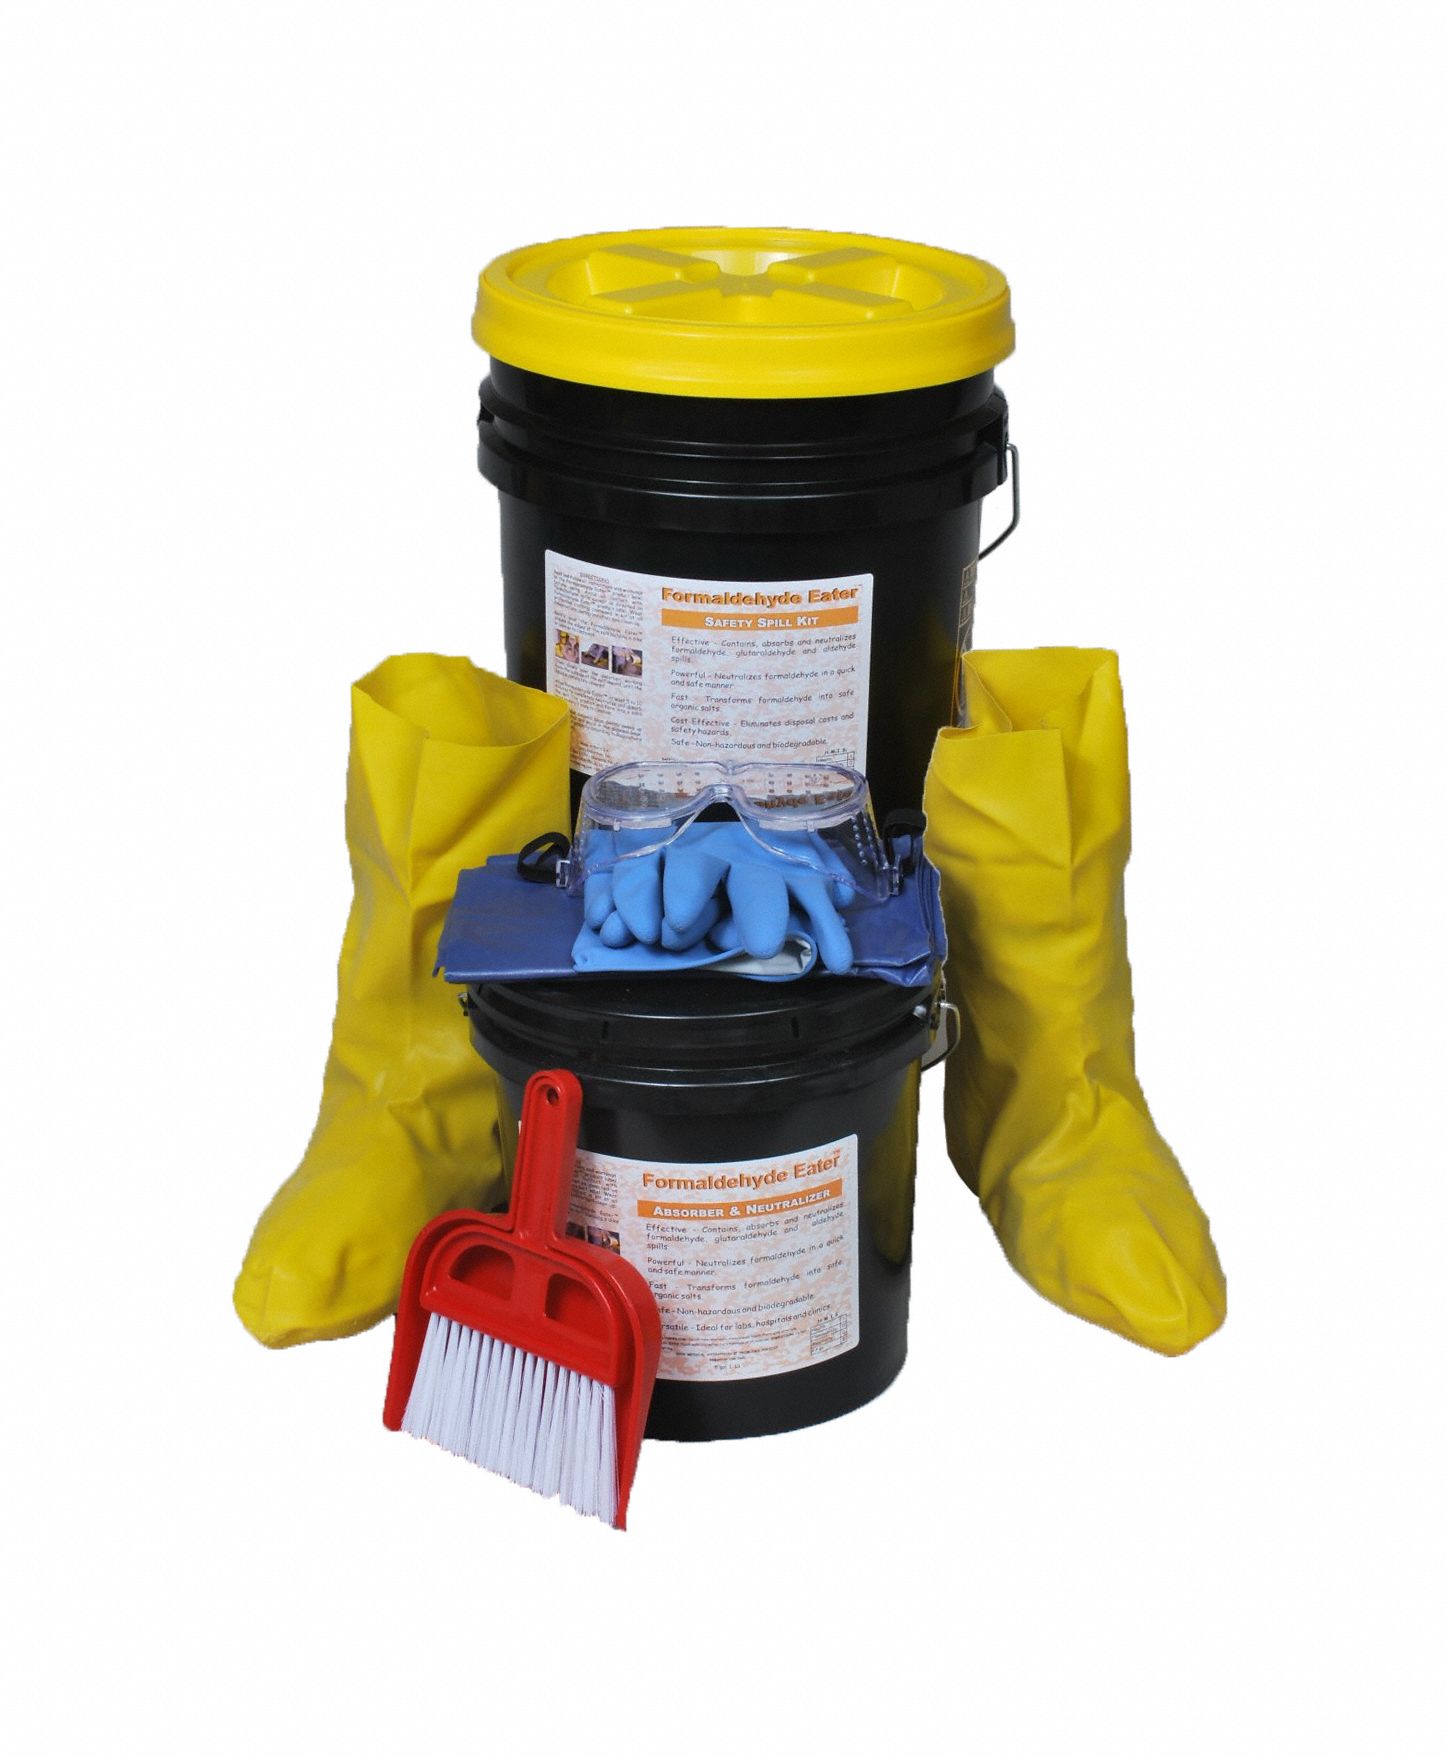 Spill Kit,  Fluids Absorbed Formaldehyde,  Container Type Bucket,  2 gal Container Capacity